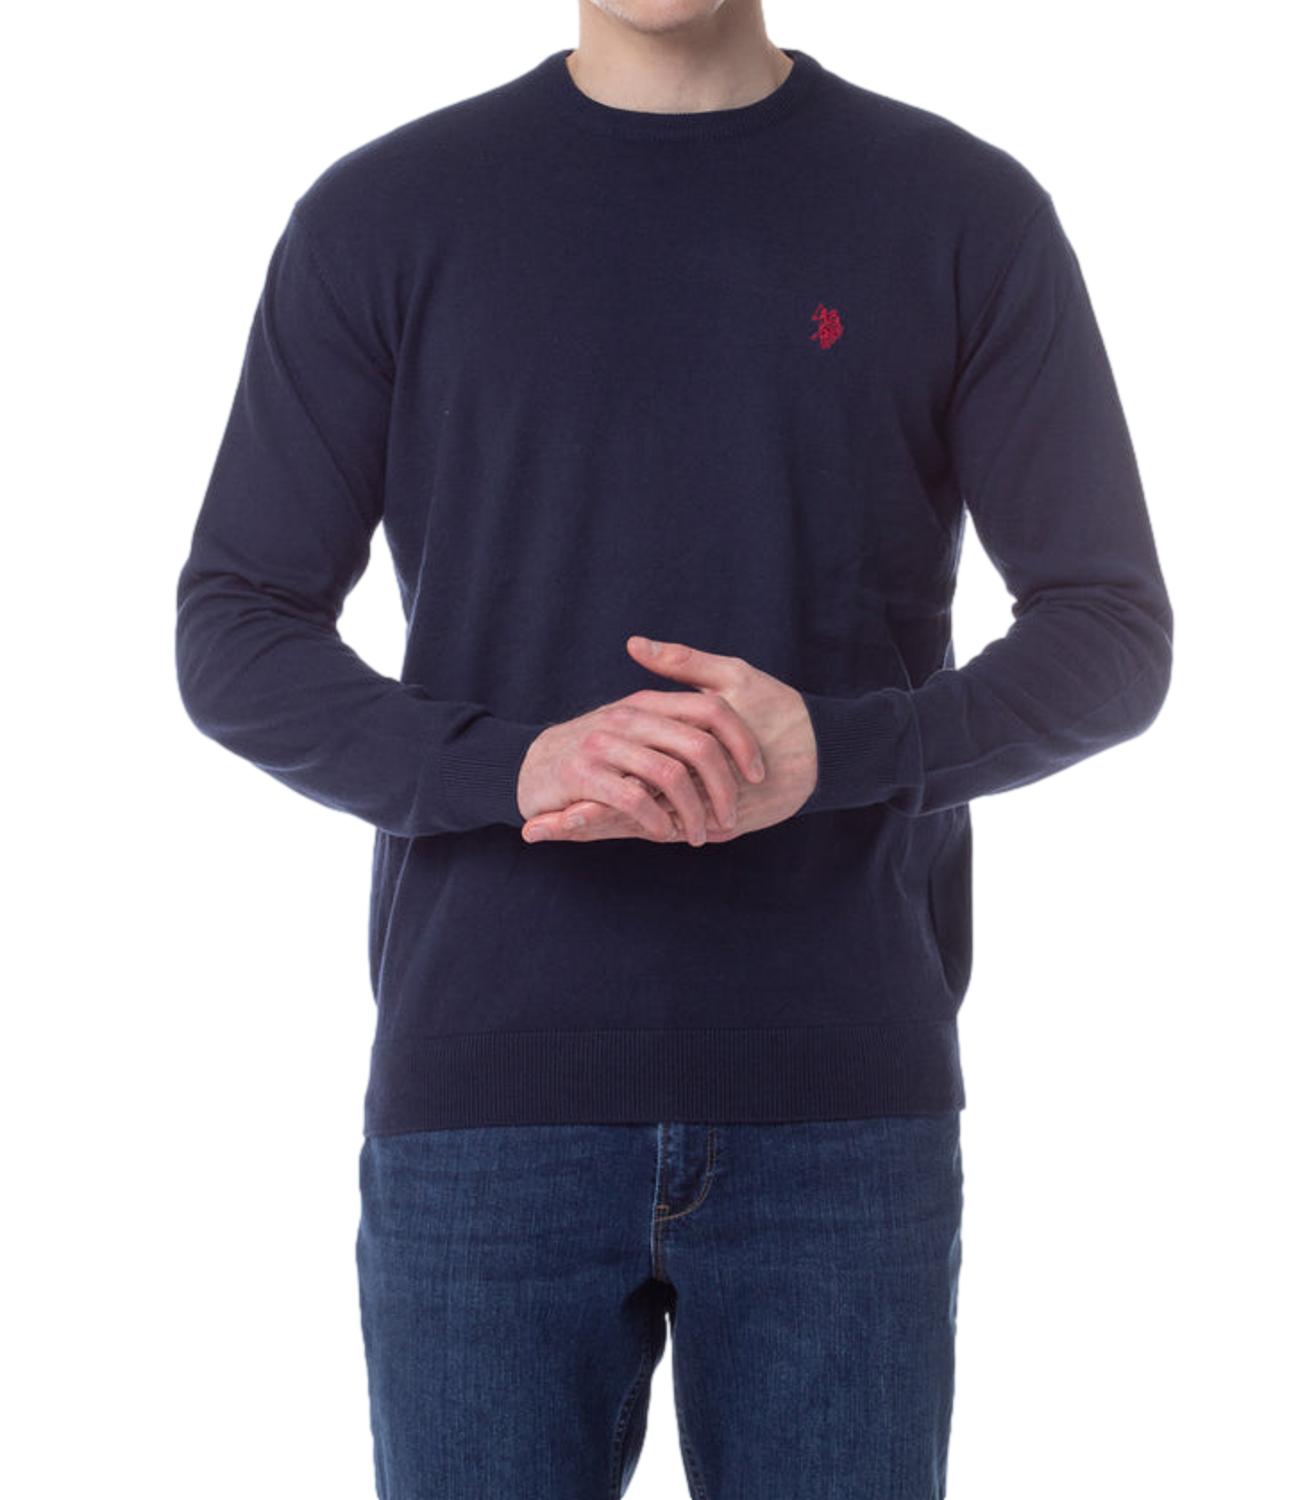 Blue men's sweater with red wool logo